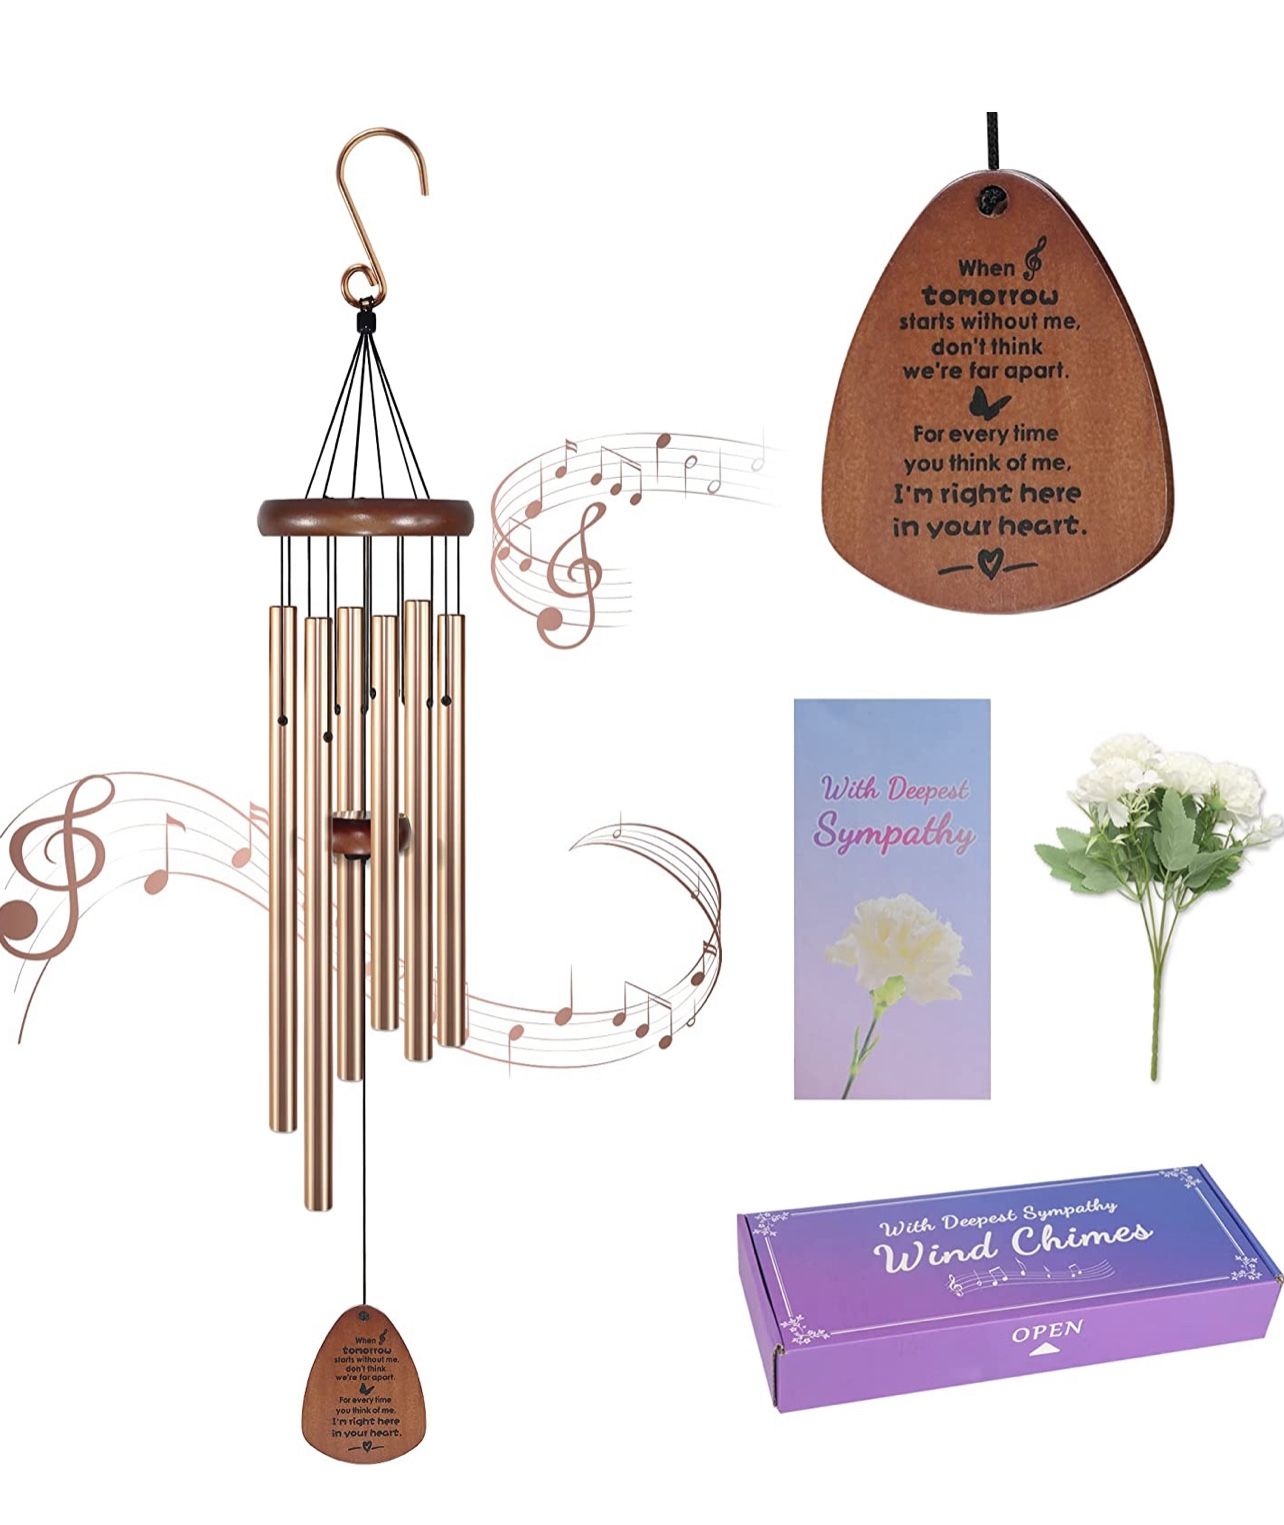 Memorial Wind Chimes for Loss of Loved One, Sympathy Wind Chimes in Memory of A Loved One, 